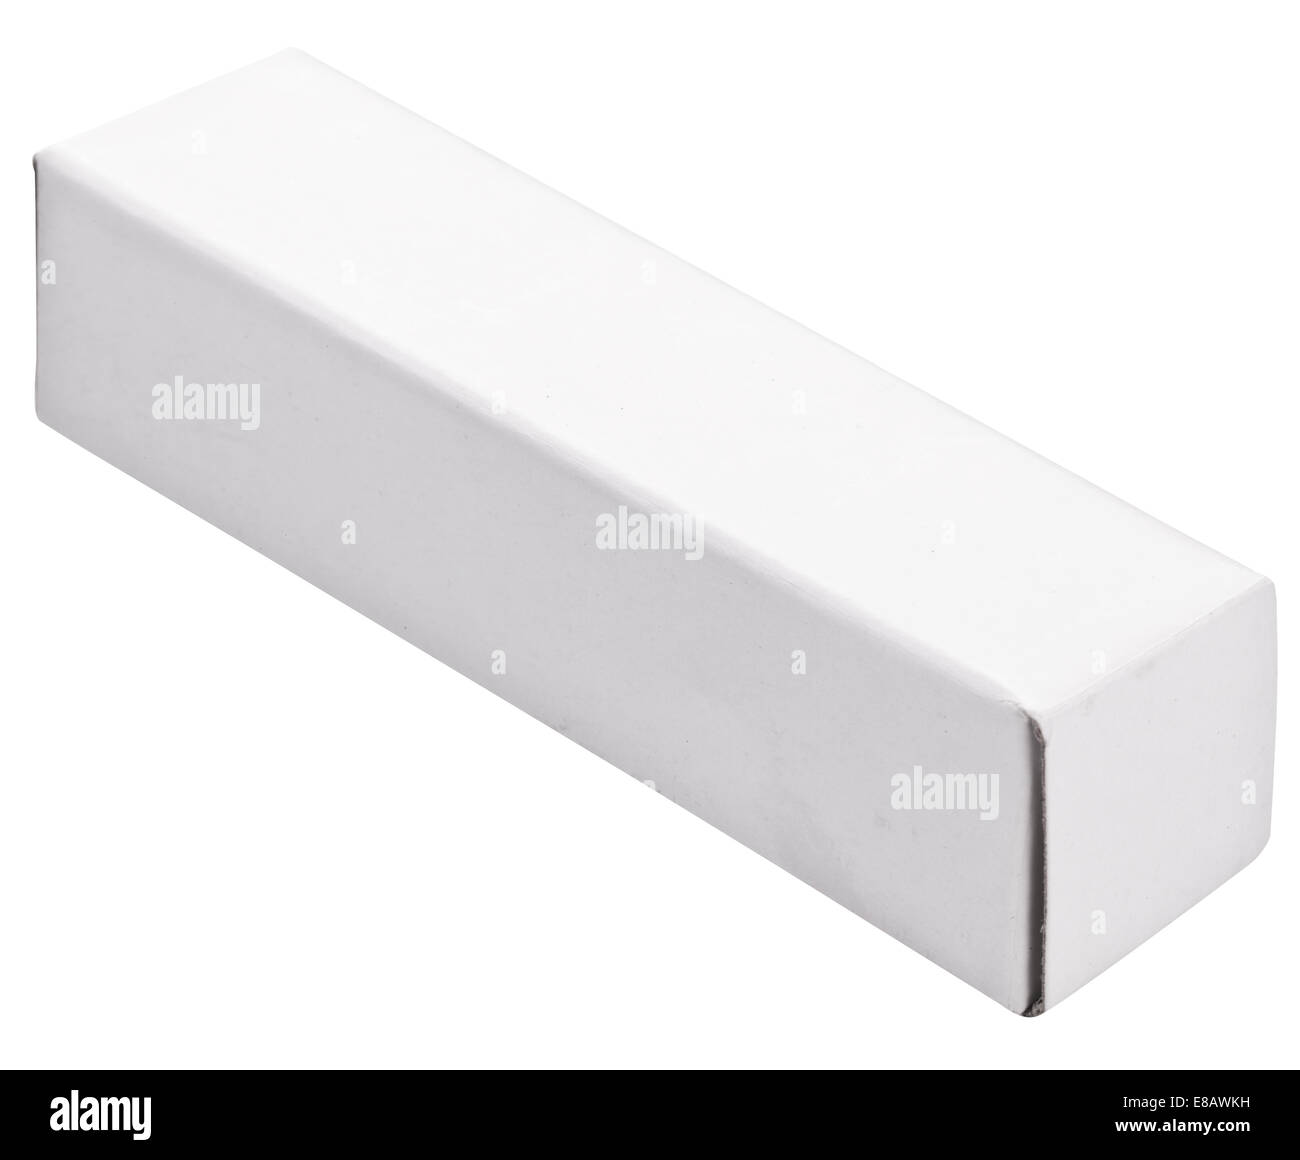 Long white paper box. File contains clipping paths. Stock Photo